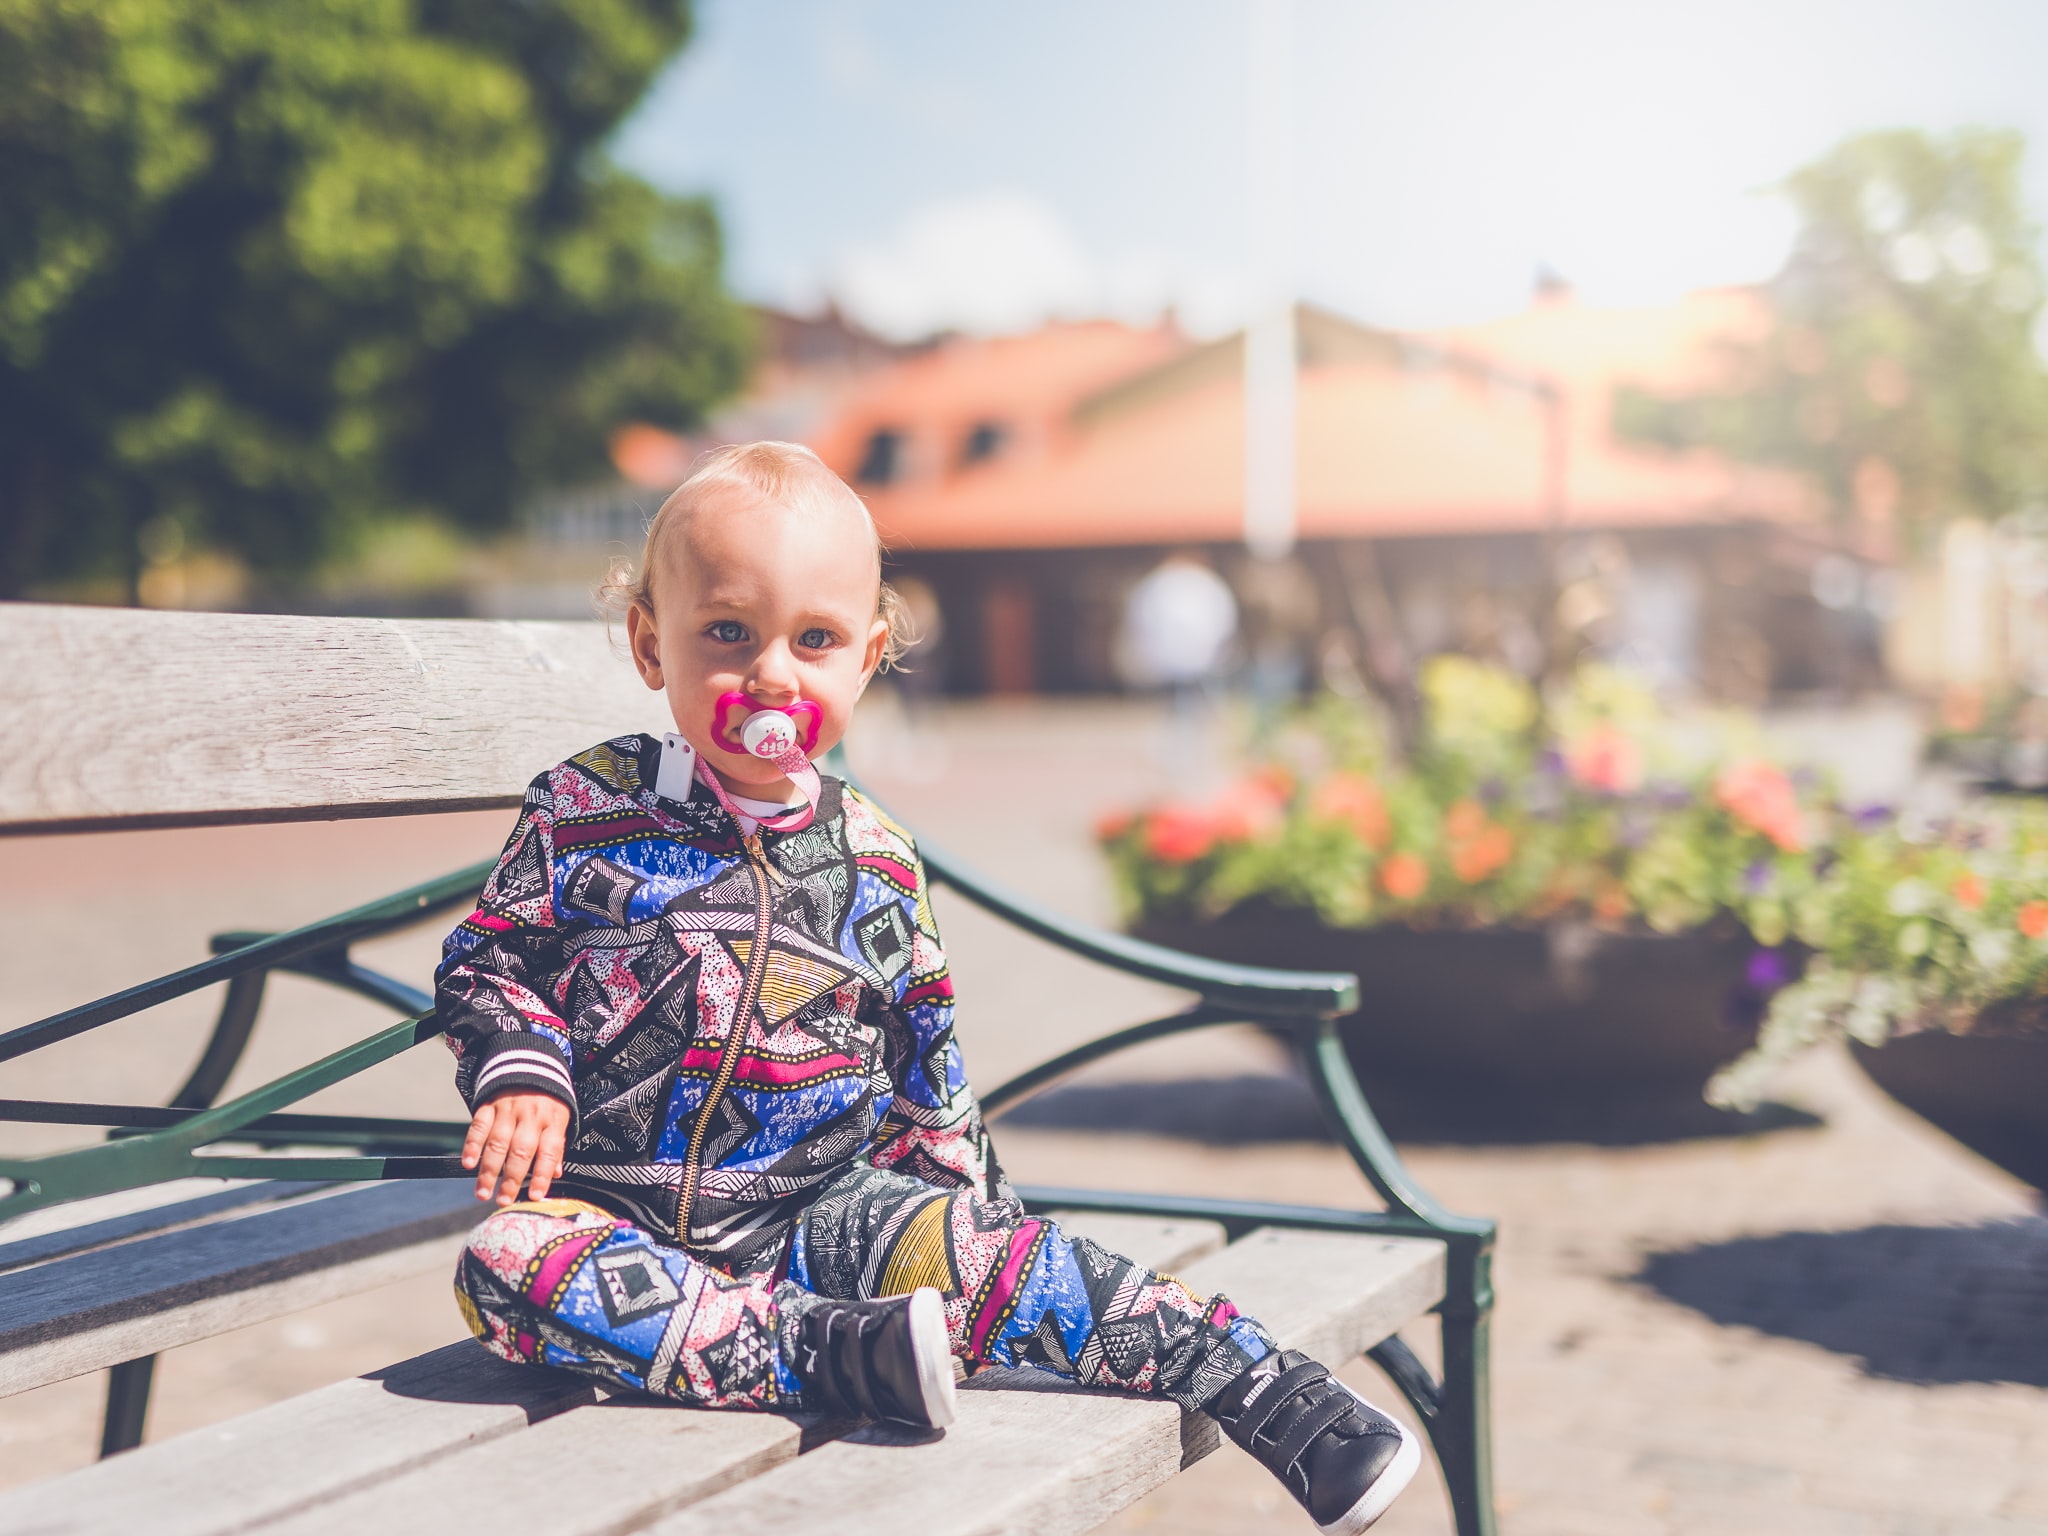 Toddler in colorful pajamas and black tennis shoes sitting on bench; image by Janko Ferlic, via Unsplash.com.